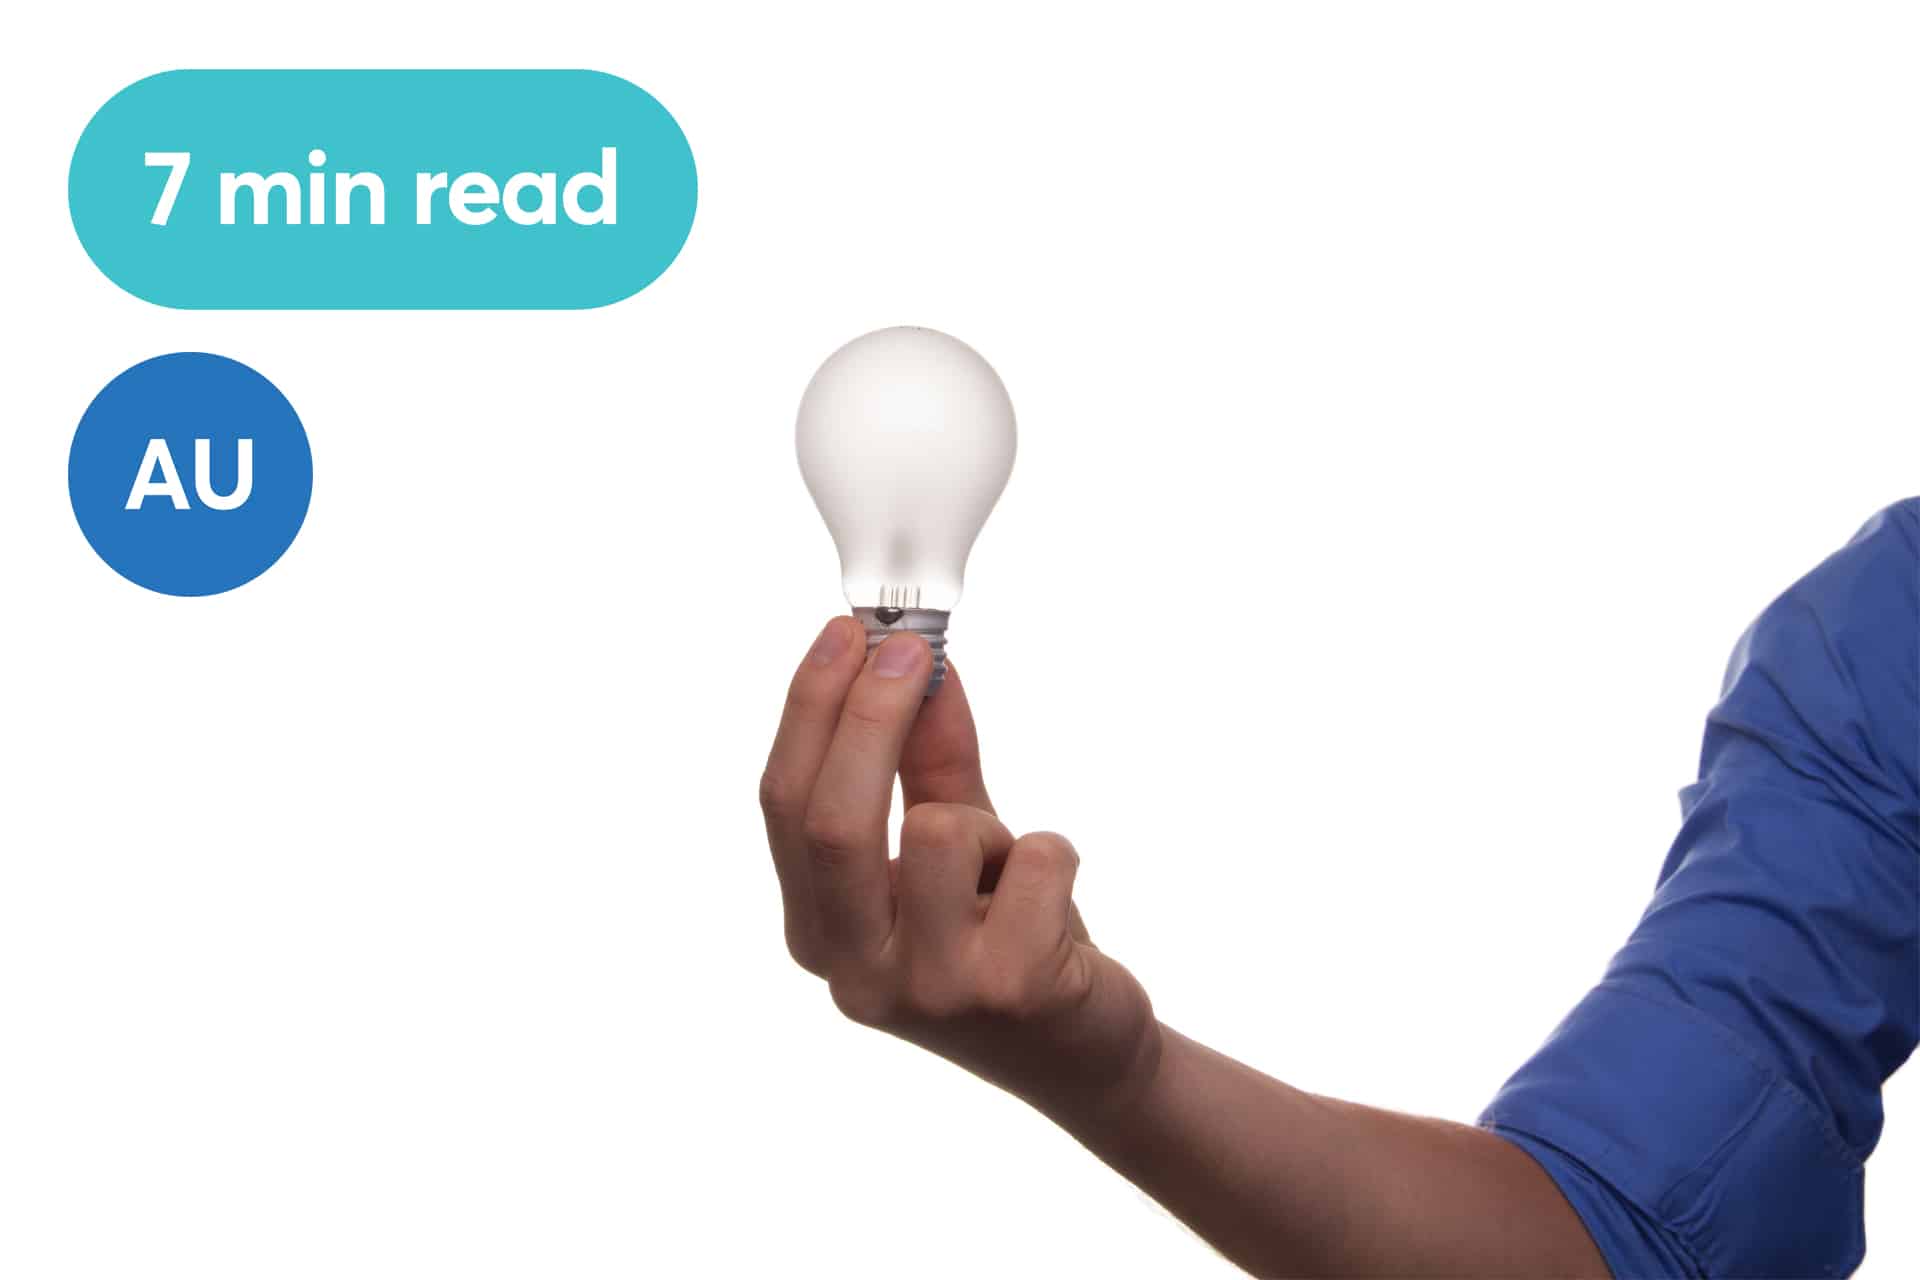 Hand holding a light bulb to represent an article about financial myths